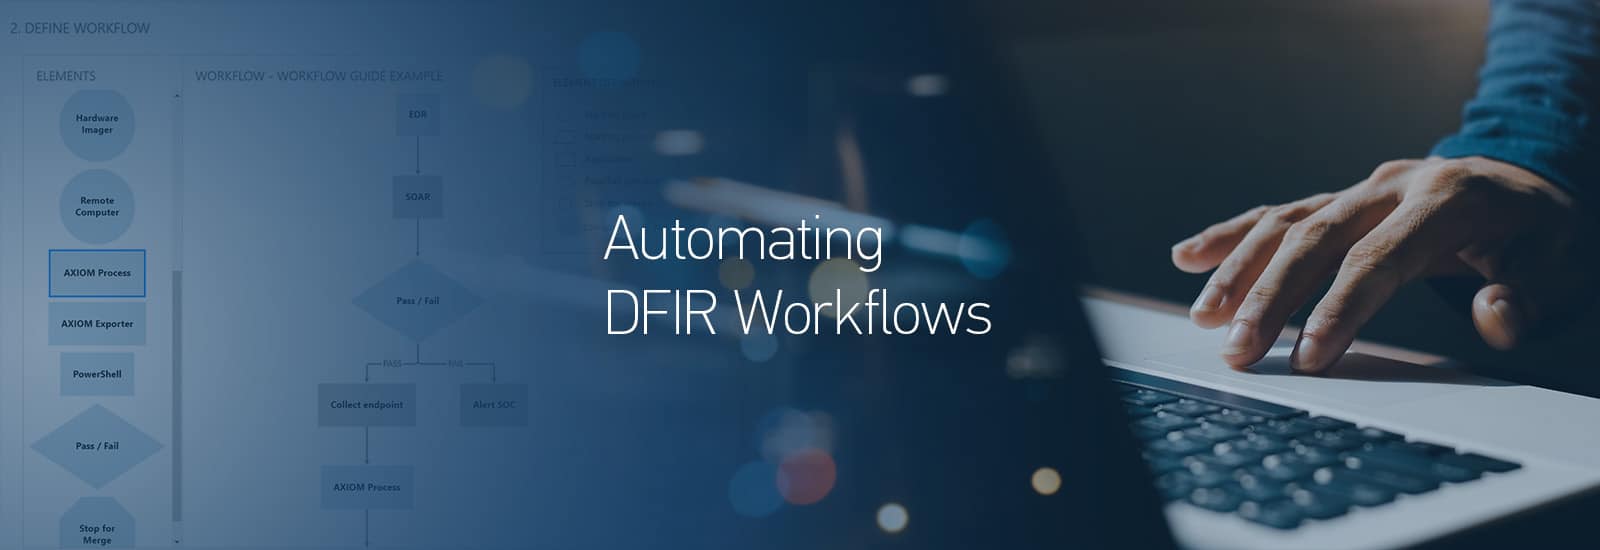 A decorative header for the Magnet AUTOMATE Enterprise Automating DFIR Workflows posts